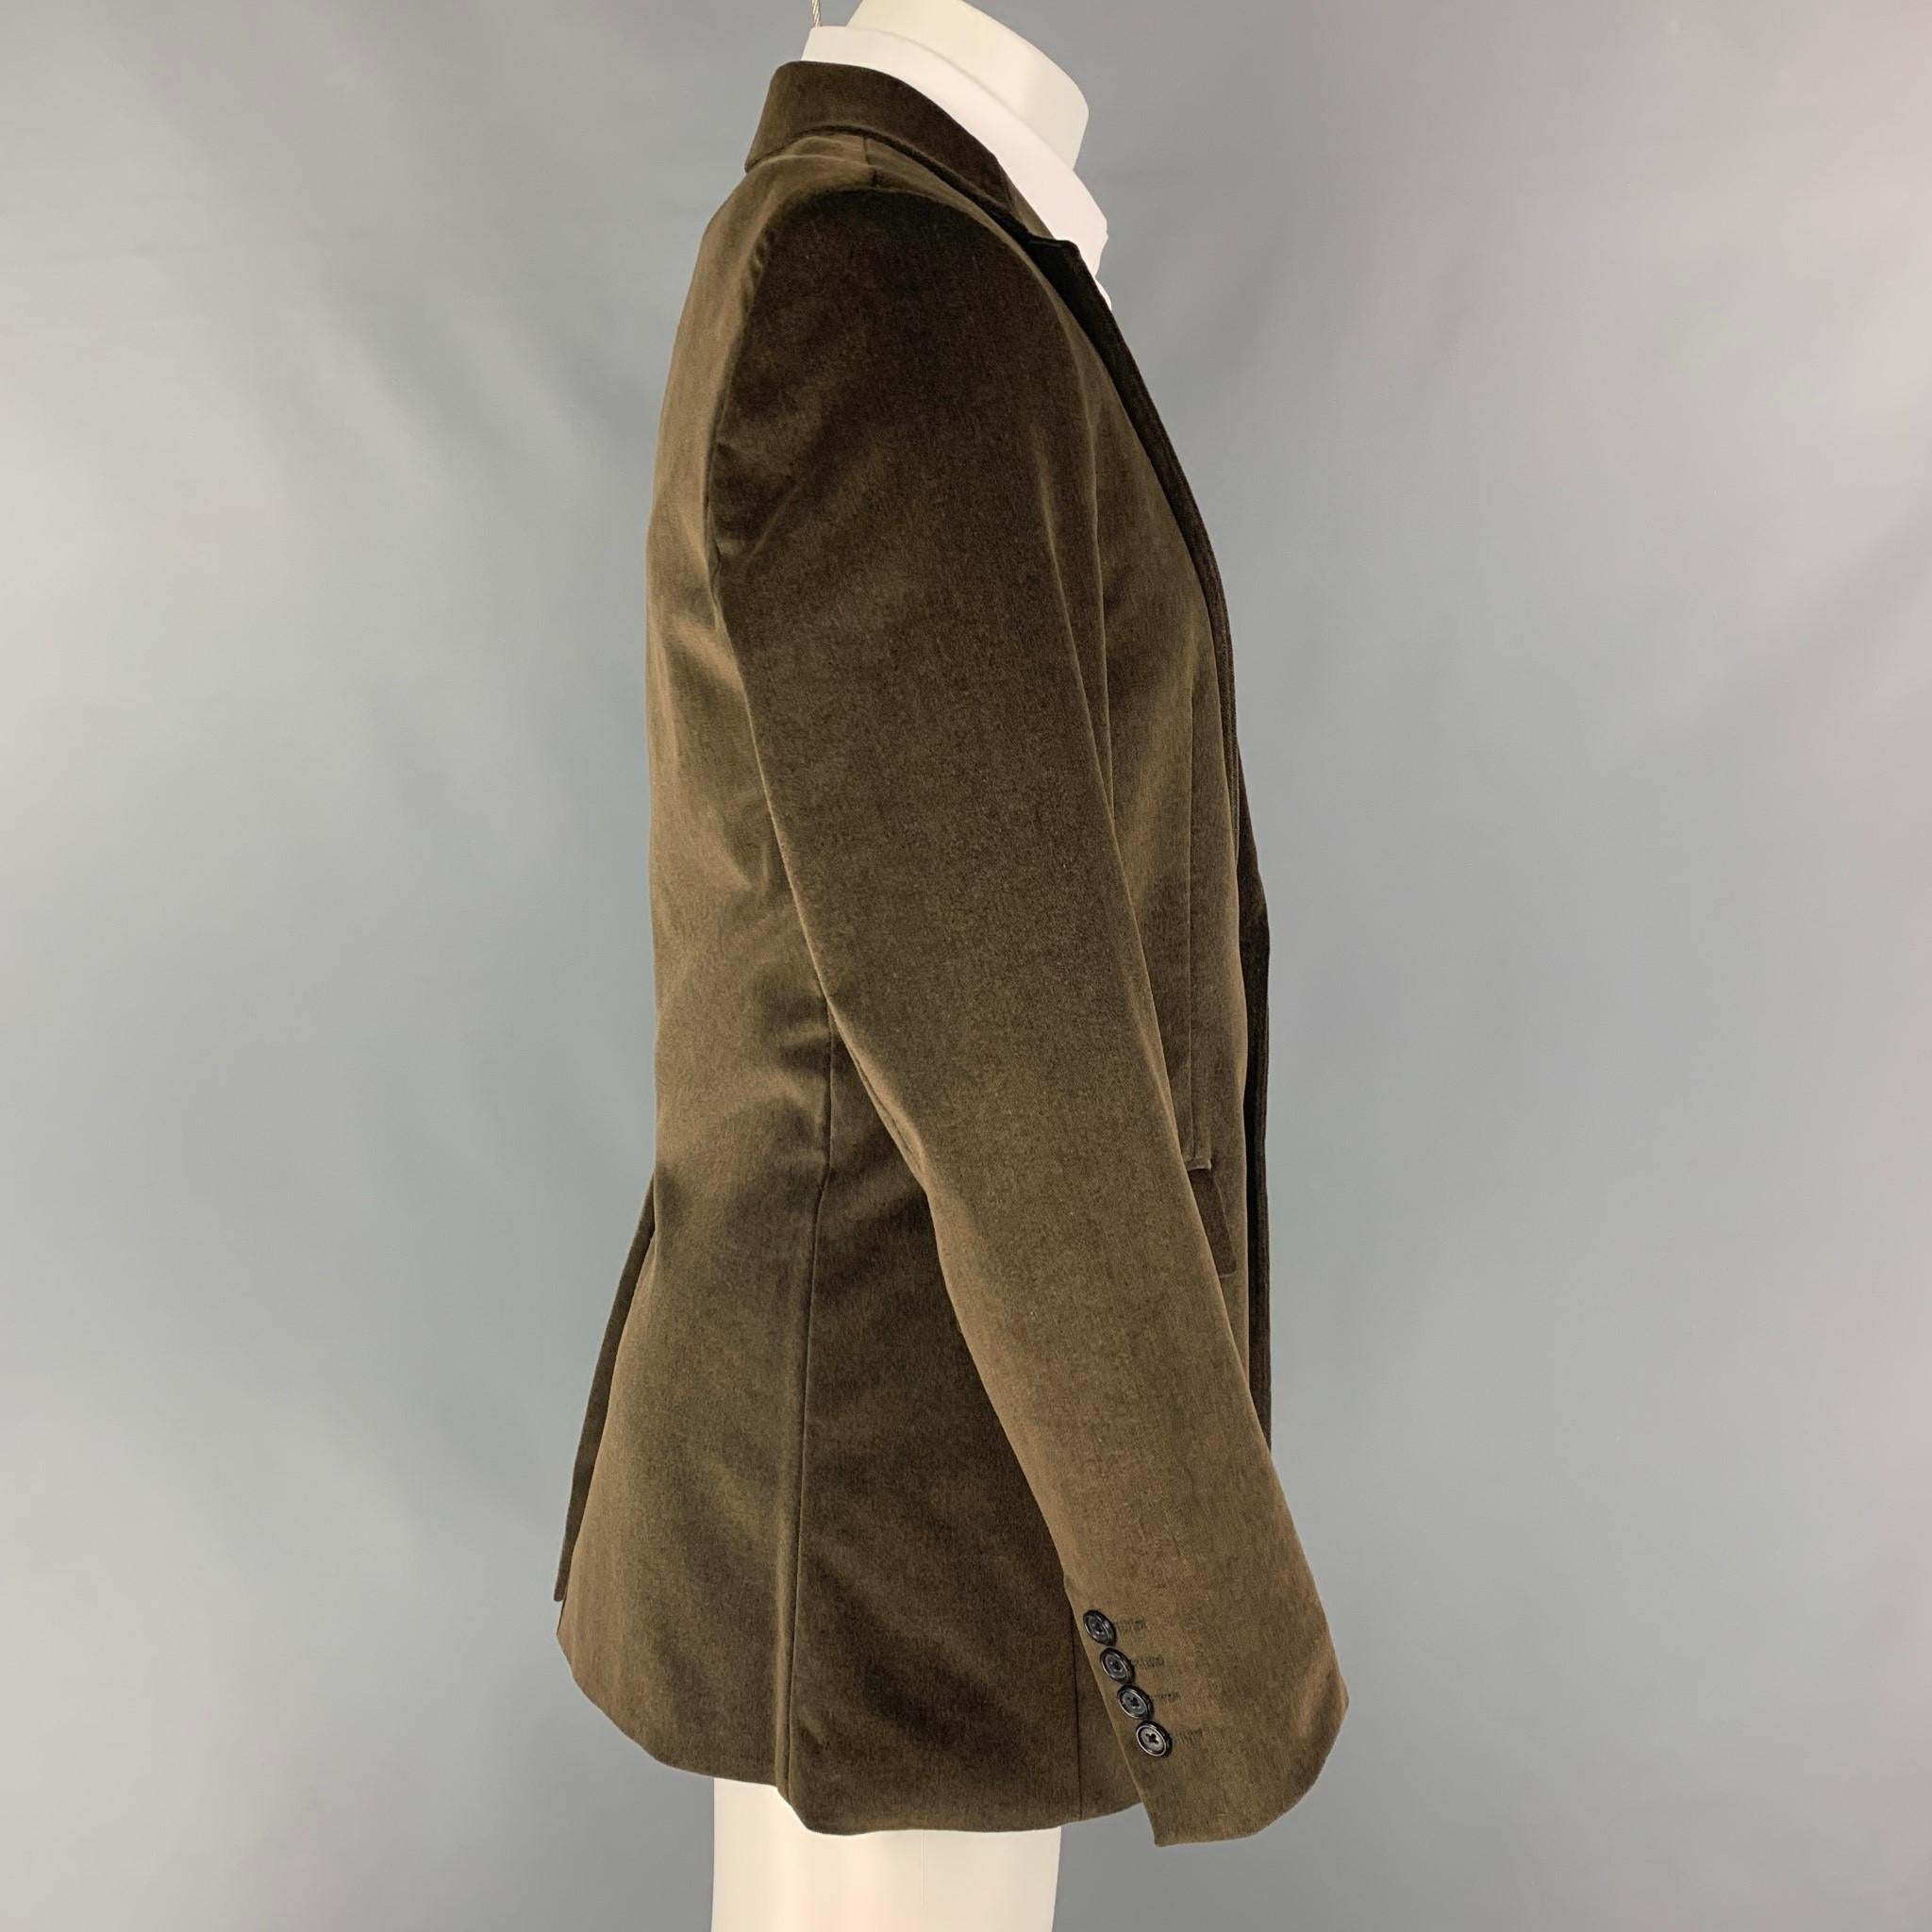 THEORY sport coat comes in a taupe velvet cotton with a full liner featuring a notch lapel, flap pockets, single back vent, and a double button closure. 

Very Good Pre-Owned Condition.
Marked: 40 R

Measurements:

Shoulder: 18.5 in.
Chest: 40